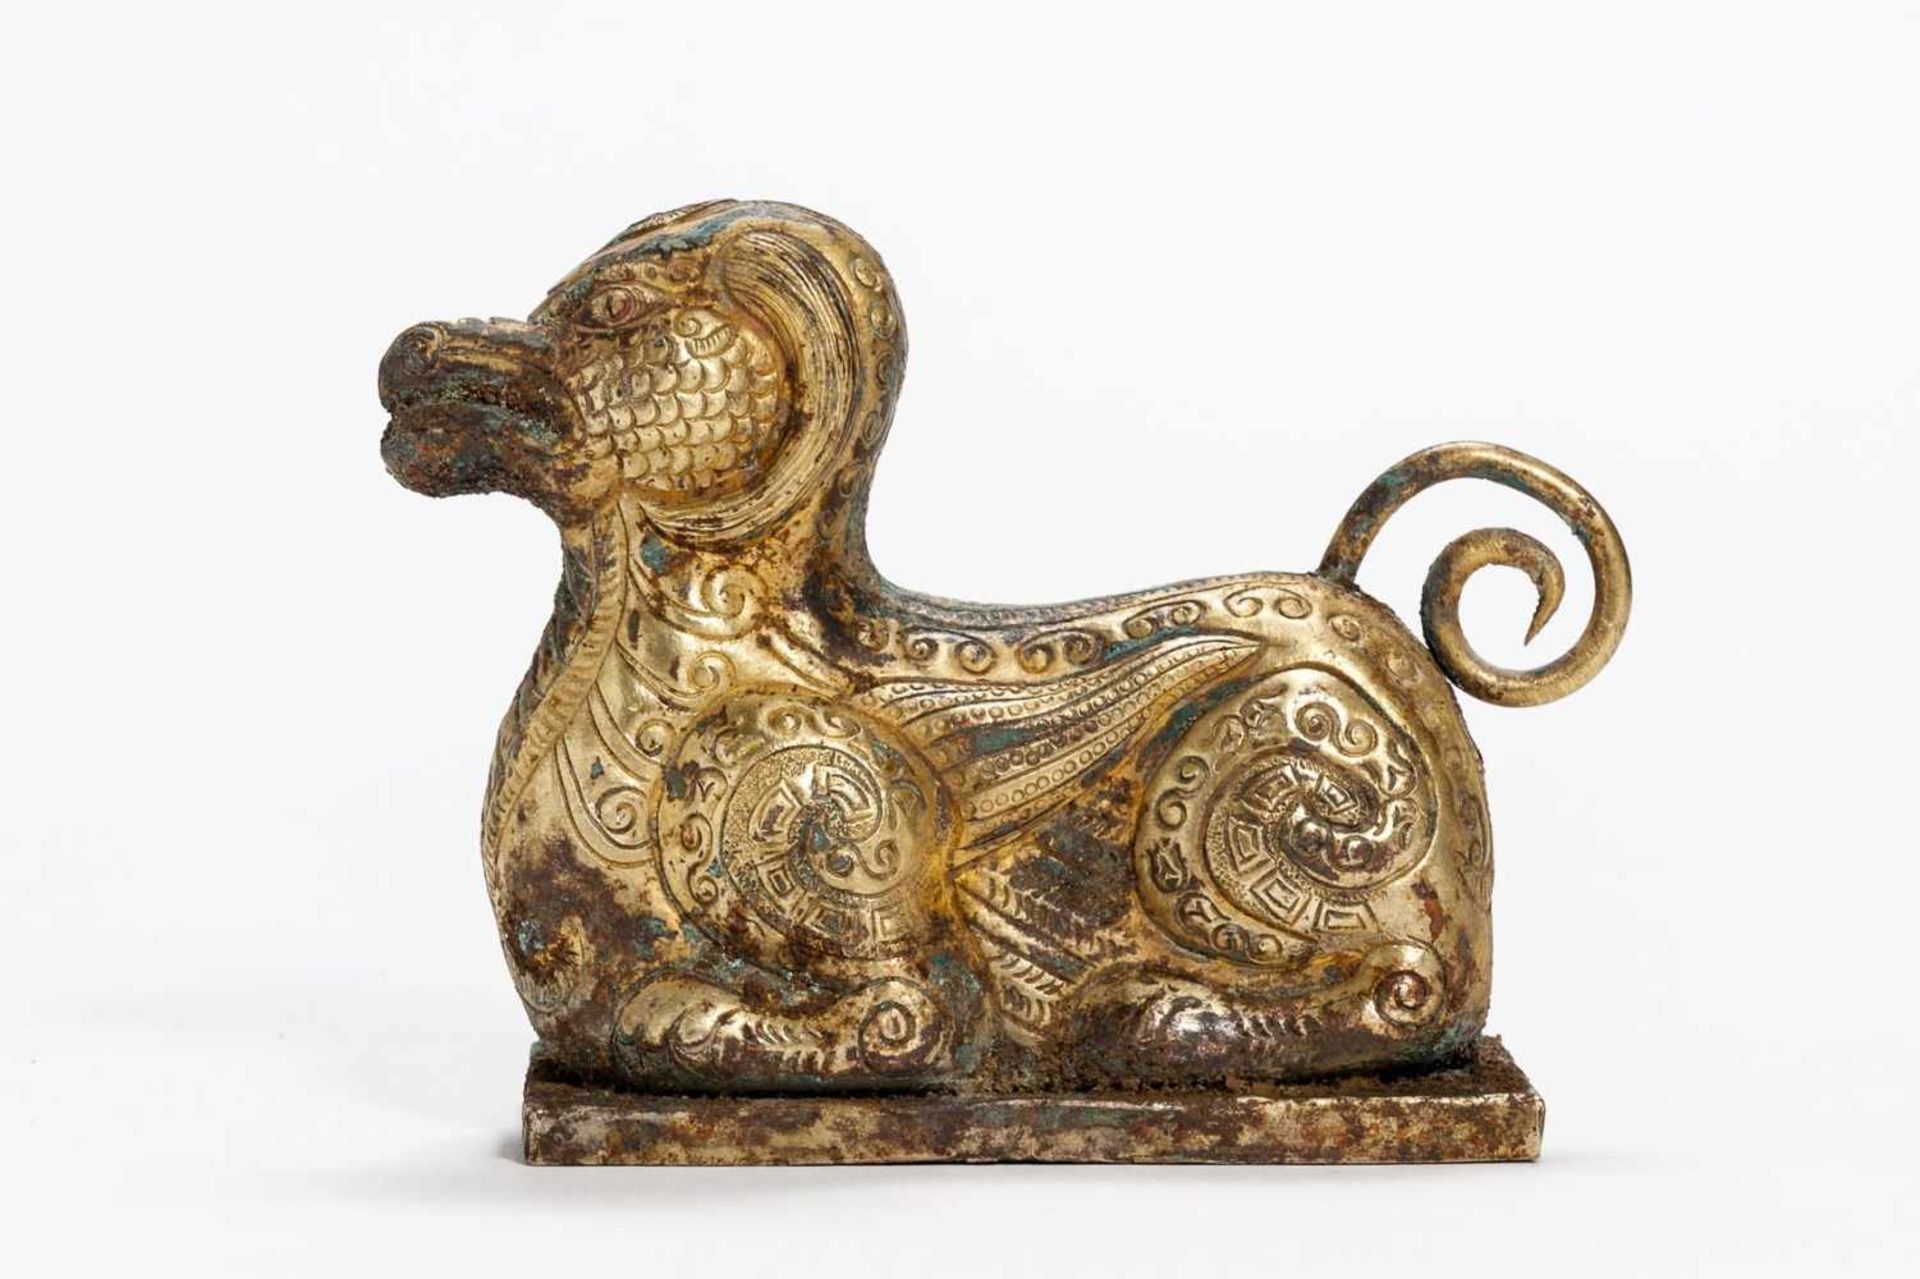 MYTHICAL ANIMAL Copper repoussé with fire gilding. China, presumably Qing-dynasty In archaic